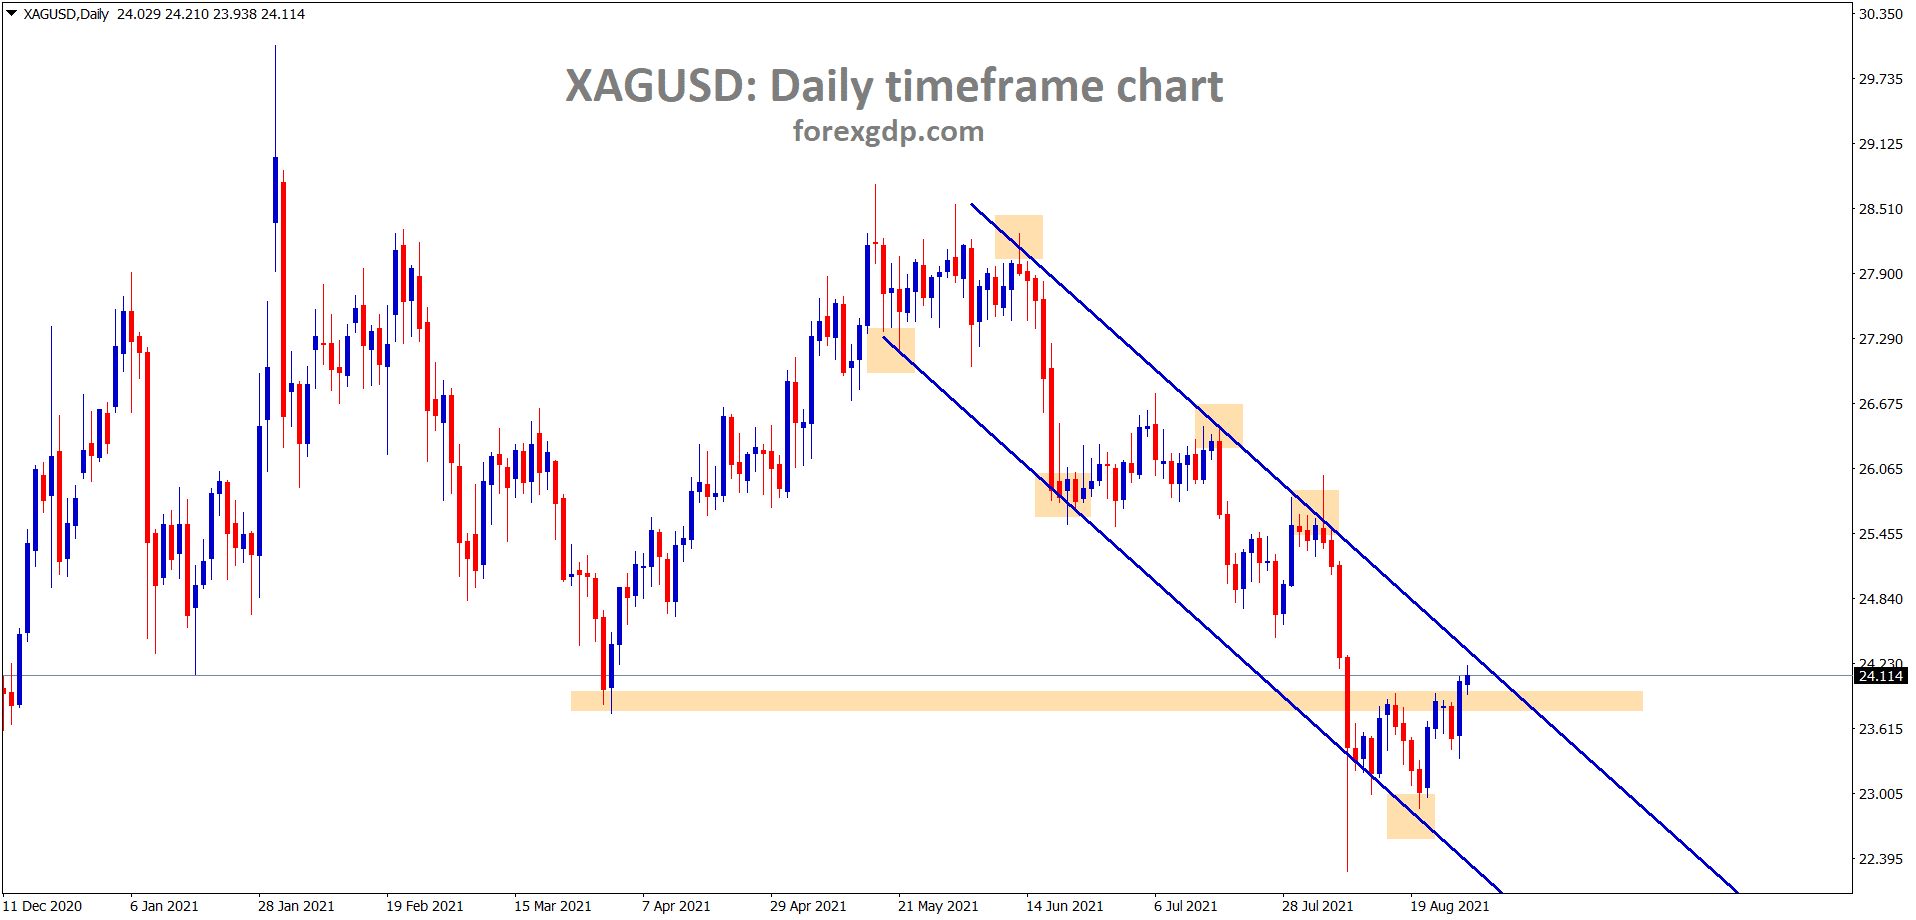 XAGUSD silver price reached the lower high of the descending channel